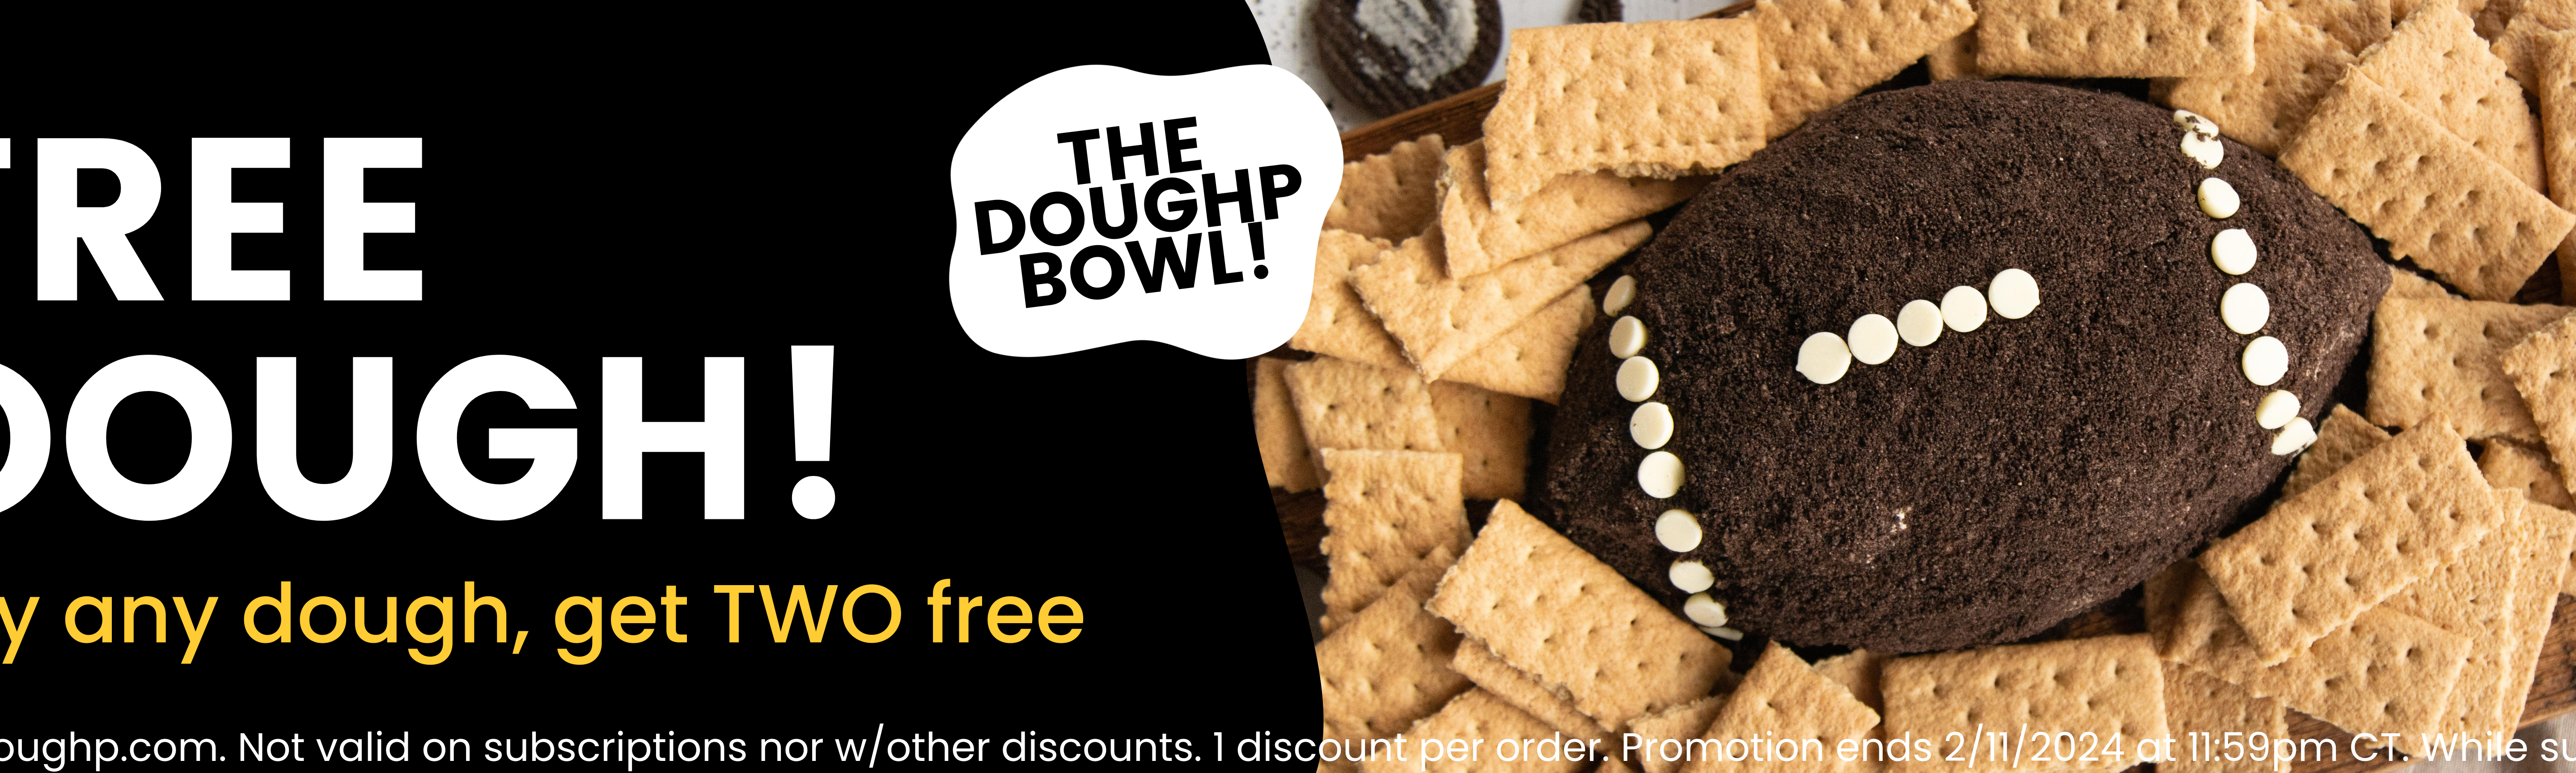 *Valid at doughp.com. Not valid on subscriptions nor w/other discounts. 1 discount per order. Promotion ends 2/11/2024 at 11:59pm CT. While supplies last.